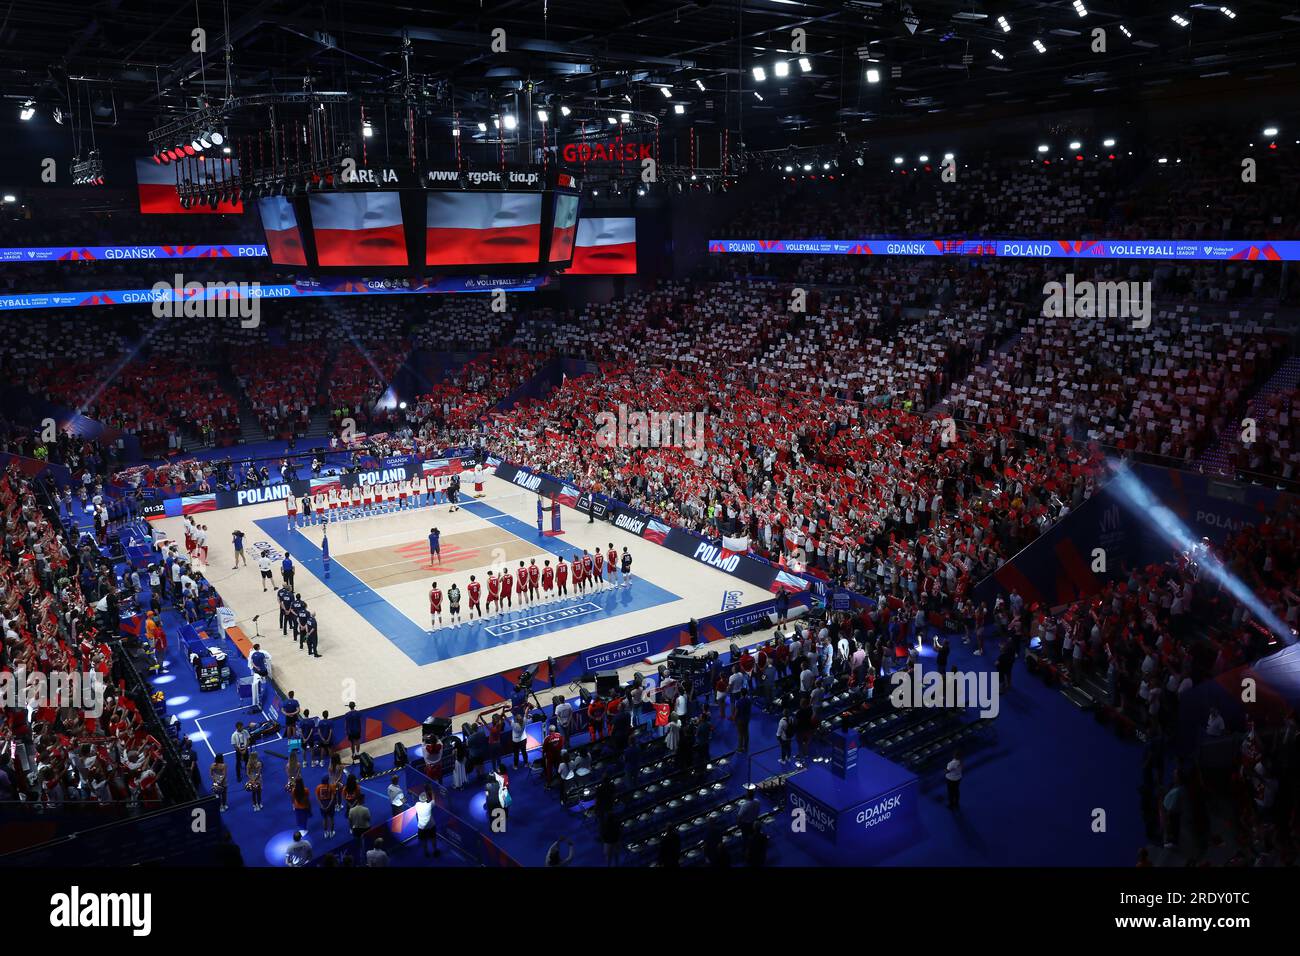 Gdansk, Poland. 23rd July, 2023. Hala Ergo Arena hymn kibice during the FIVB Volleyball Men's Nations League match between Poland and USA on July 19, 2023 in Gdansk Poland. (Photo by Piotr Matusewicz/PressFocus/Sipa USA) Credit: Sipa USA/Alamy Live News Stock Photo